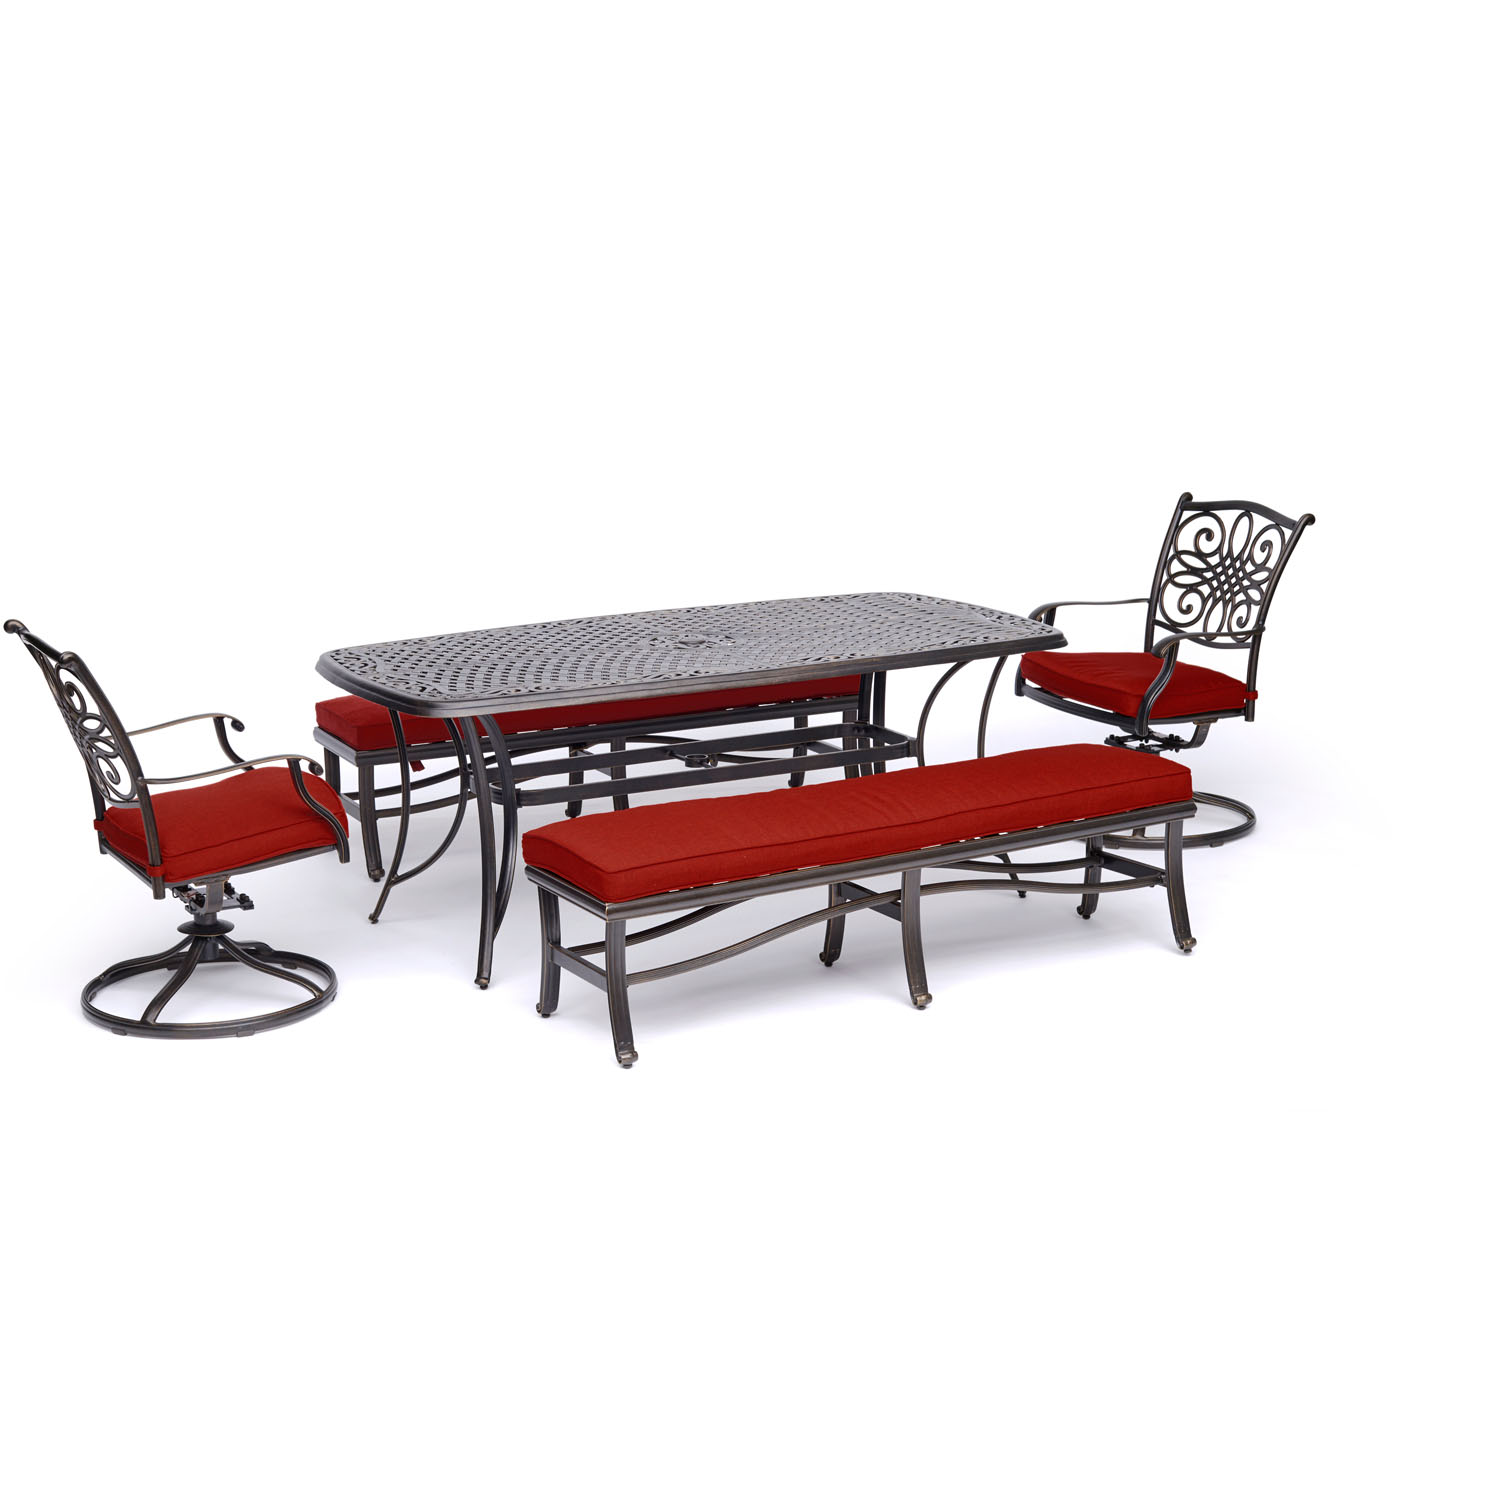 Hanover Traditions 5-Piece Patio Dining Set in Red with 2 Swivel Rockers, 2 Cushioned Benches, and a 38" x 72" Cast-Top Dining Table - image 1 of 13